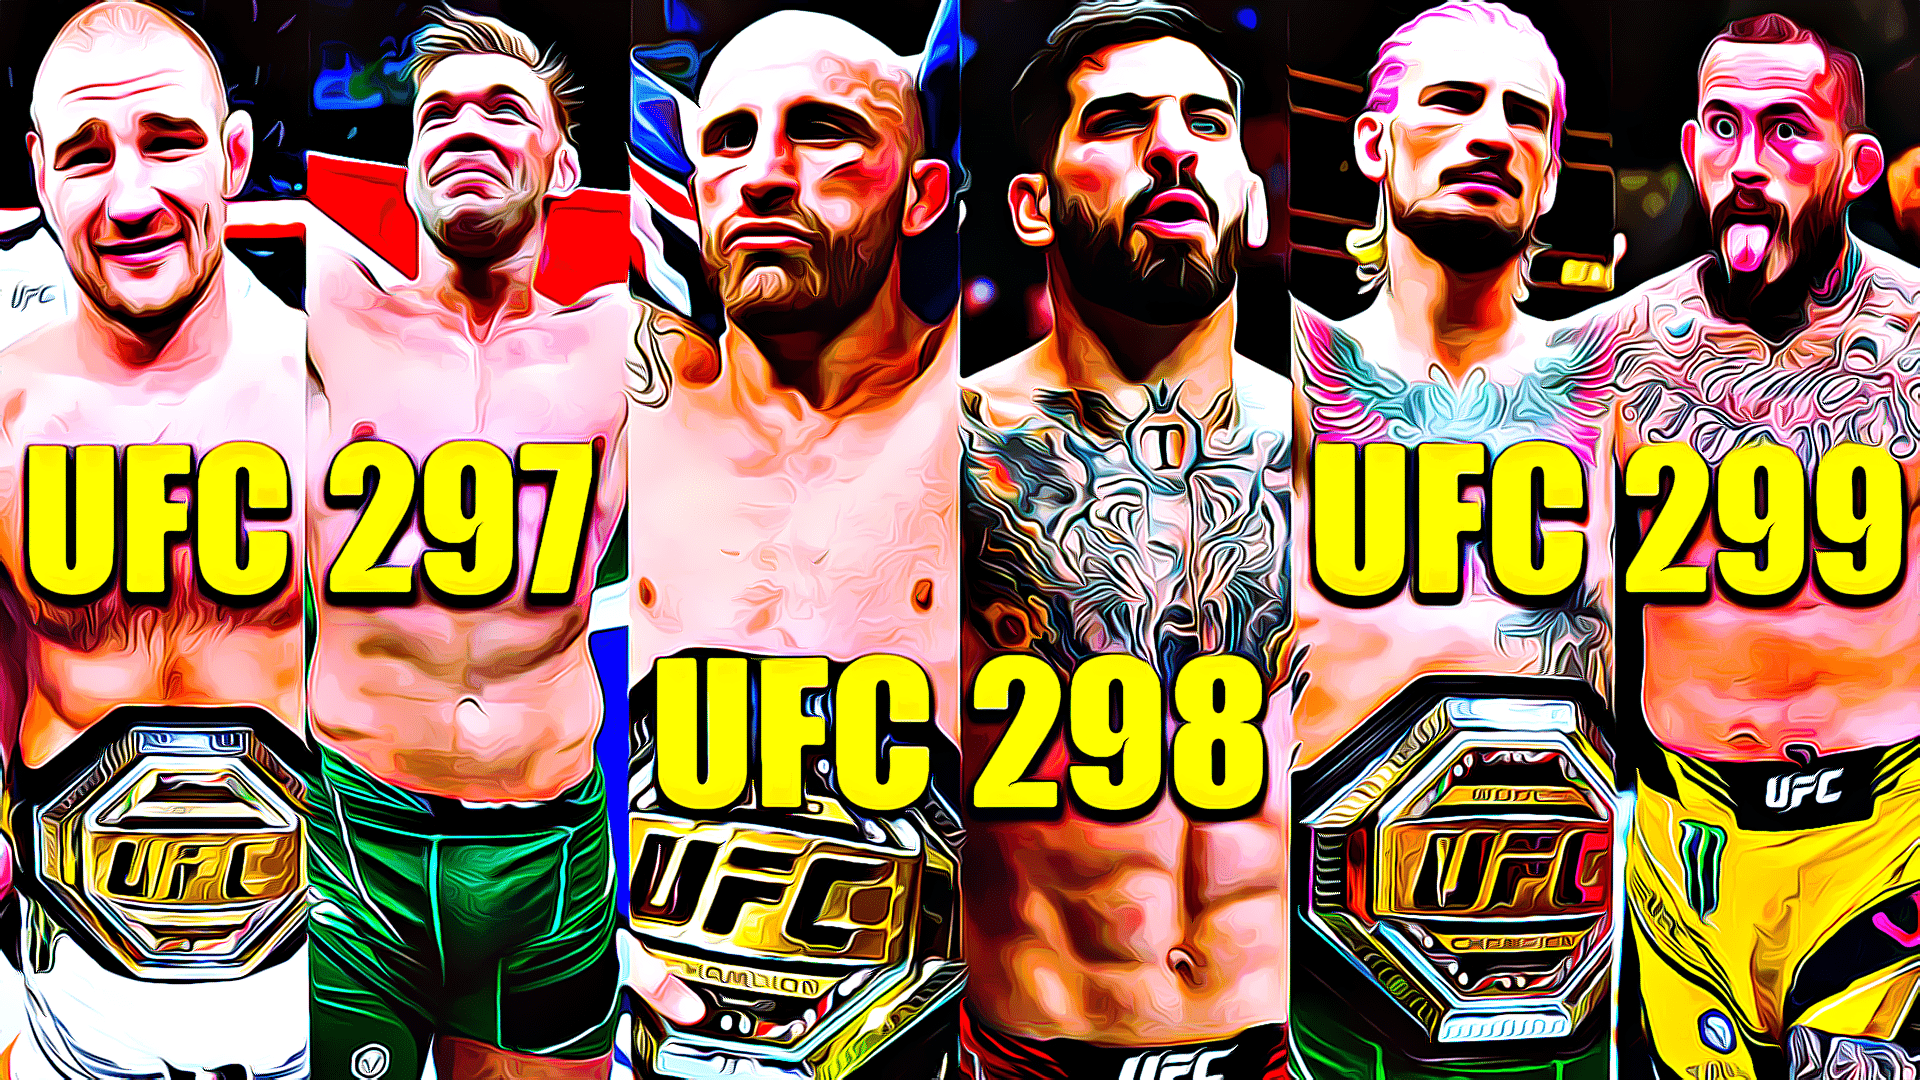 Upcoming Title Fights for UFC 297, UFC 298, UFC 299 Unveiled